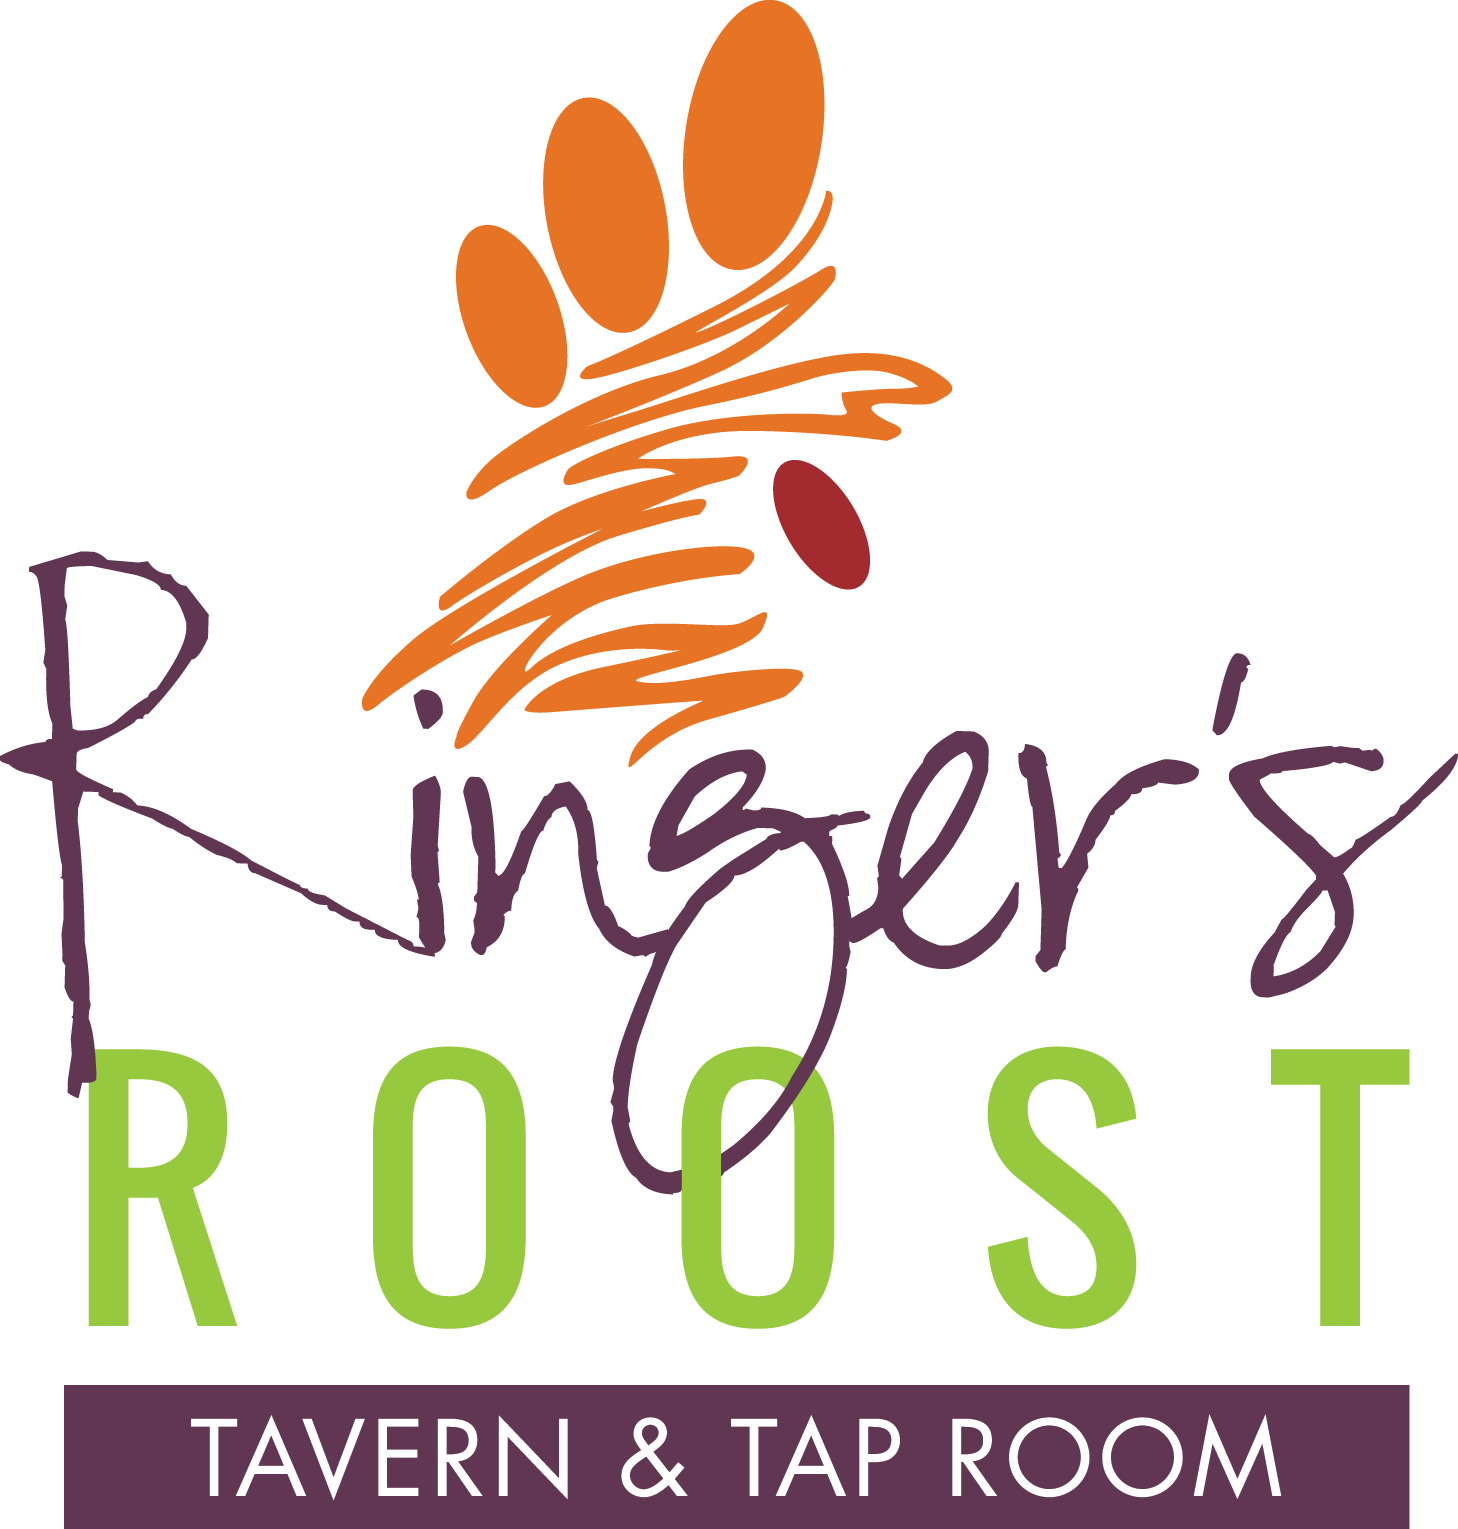 RINGERS ROOST Home